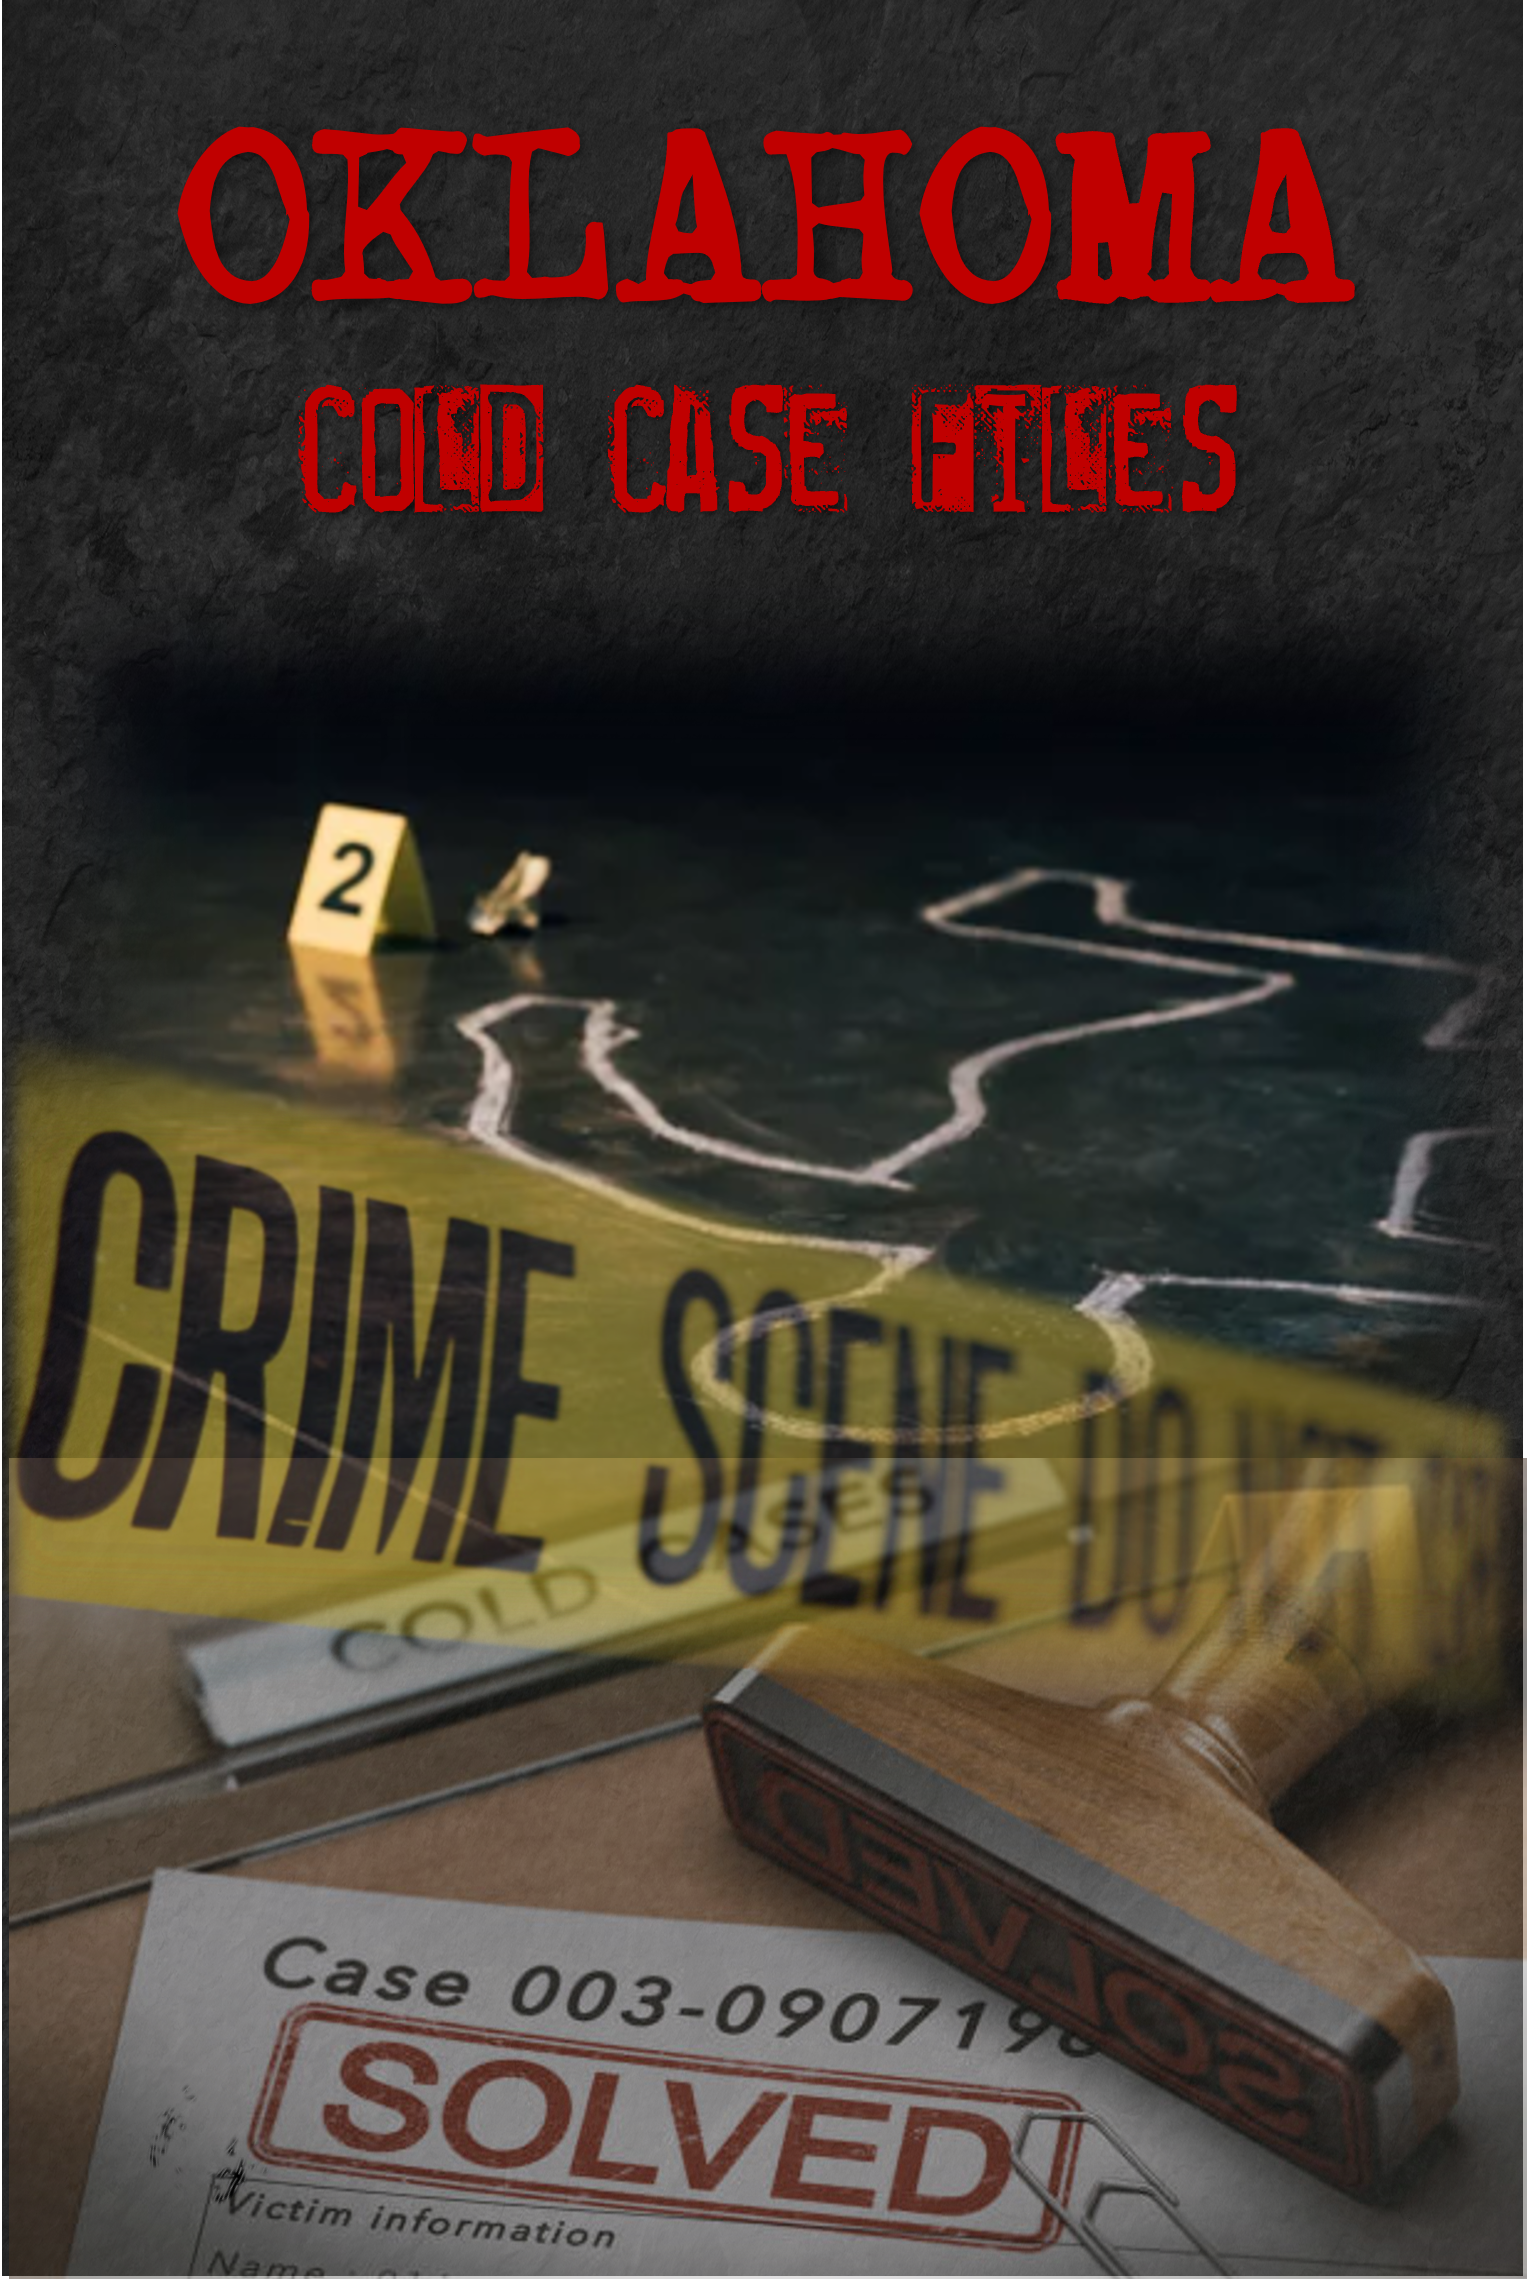 information on cold case files